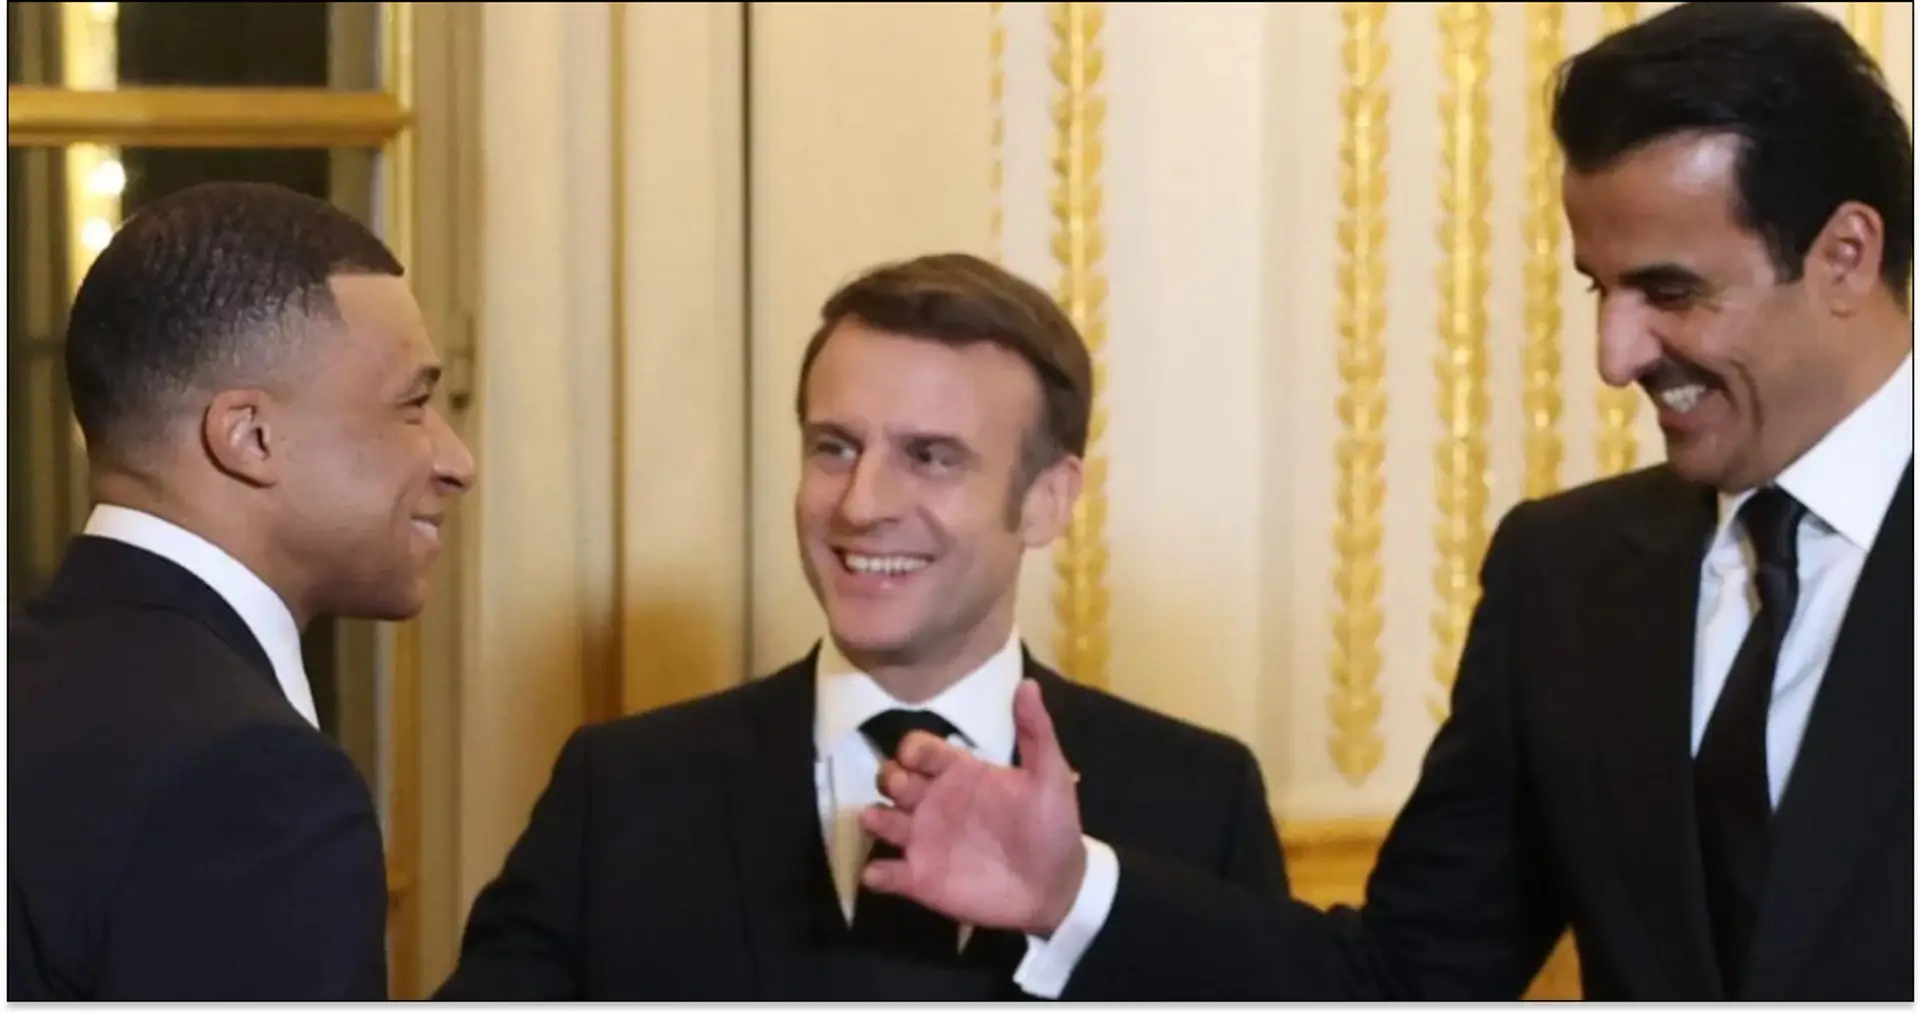 Macron jokes about Madrid move with Mbappe at France state dinner with Qatar Emir